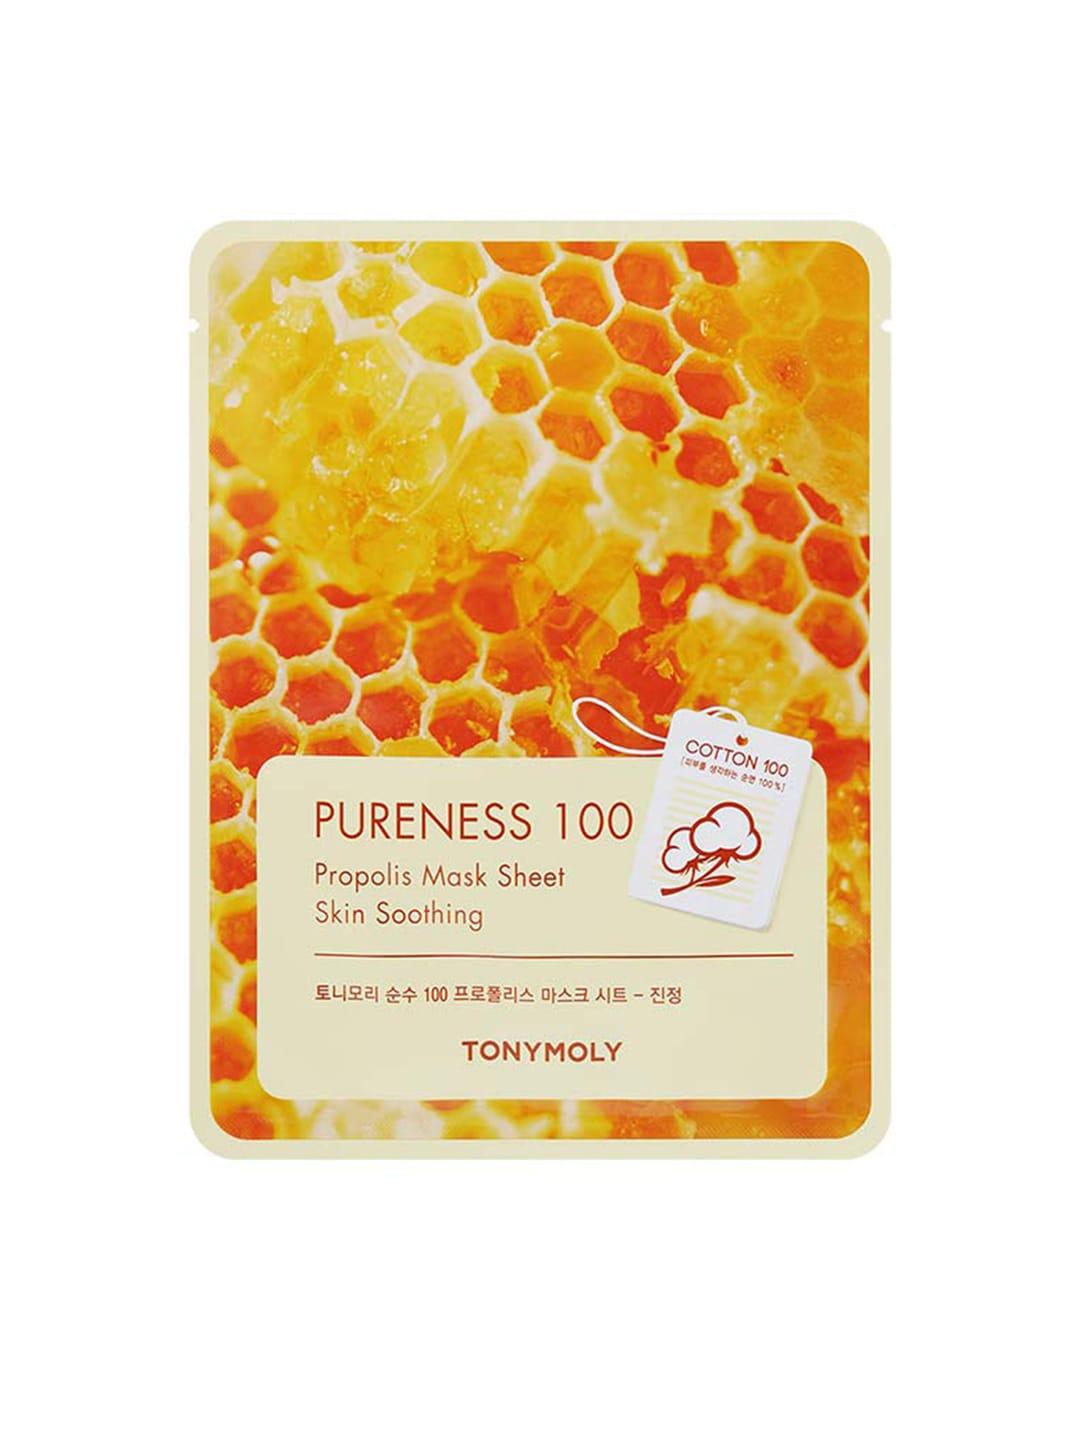 TONYMOLY Pureness 100 Propolis Mask Sheet for Skin Soothing - 21ml